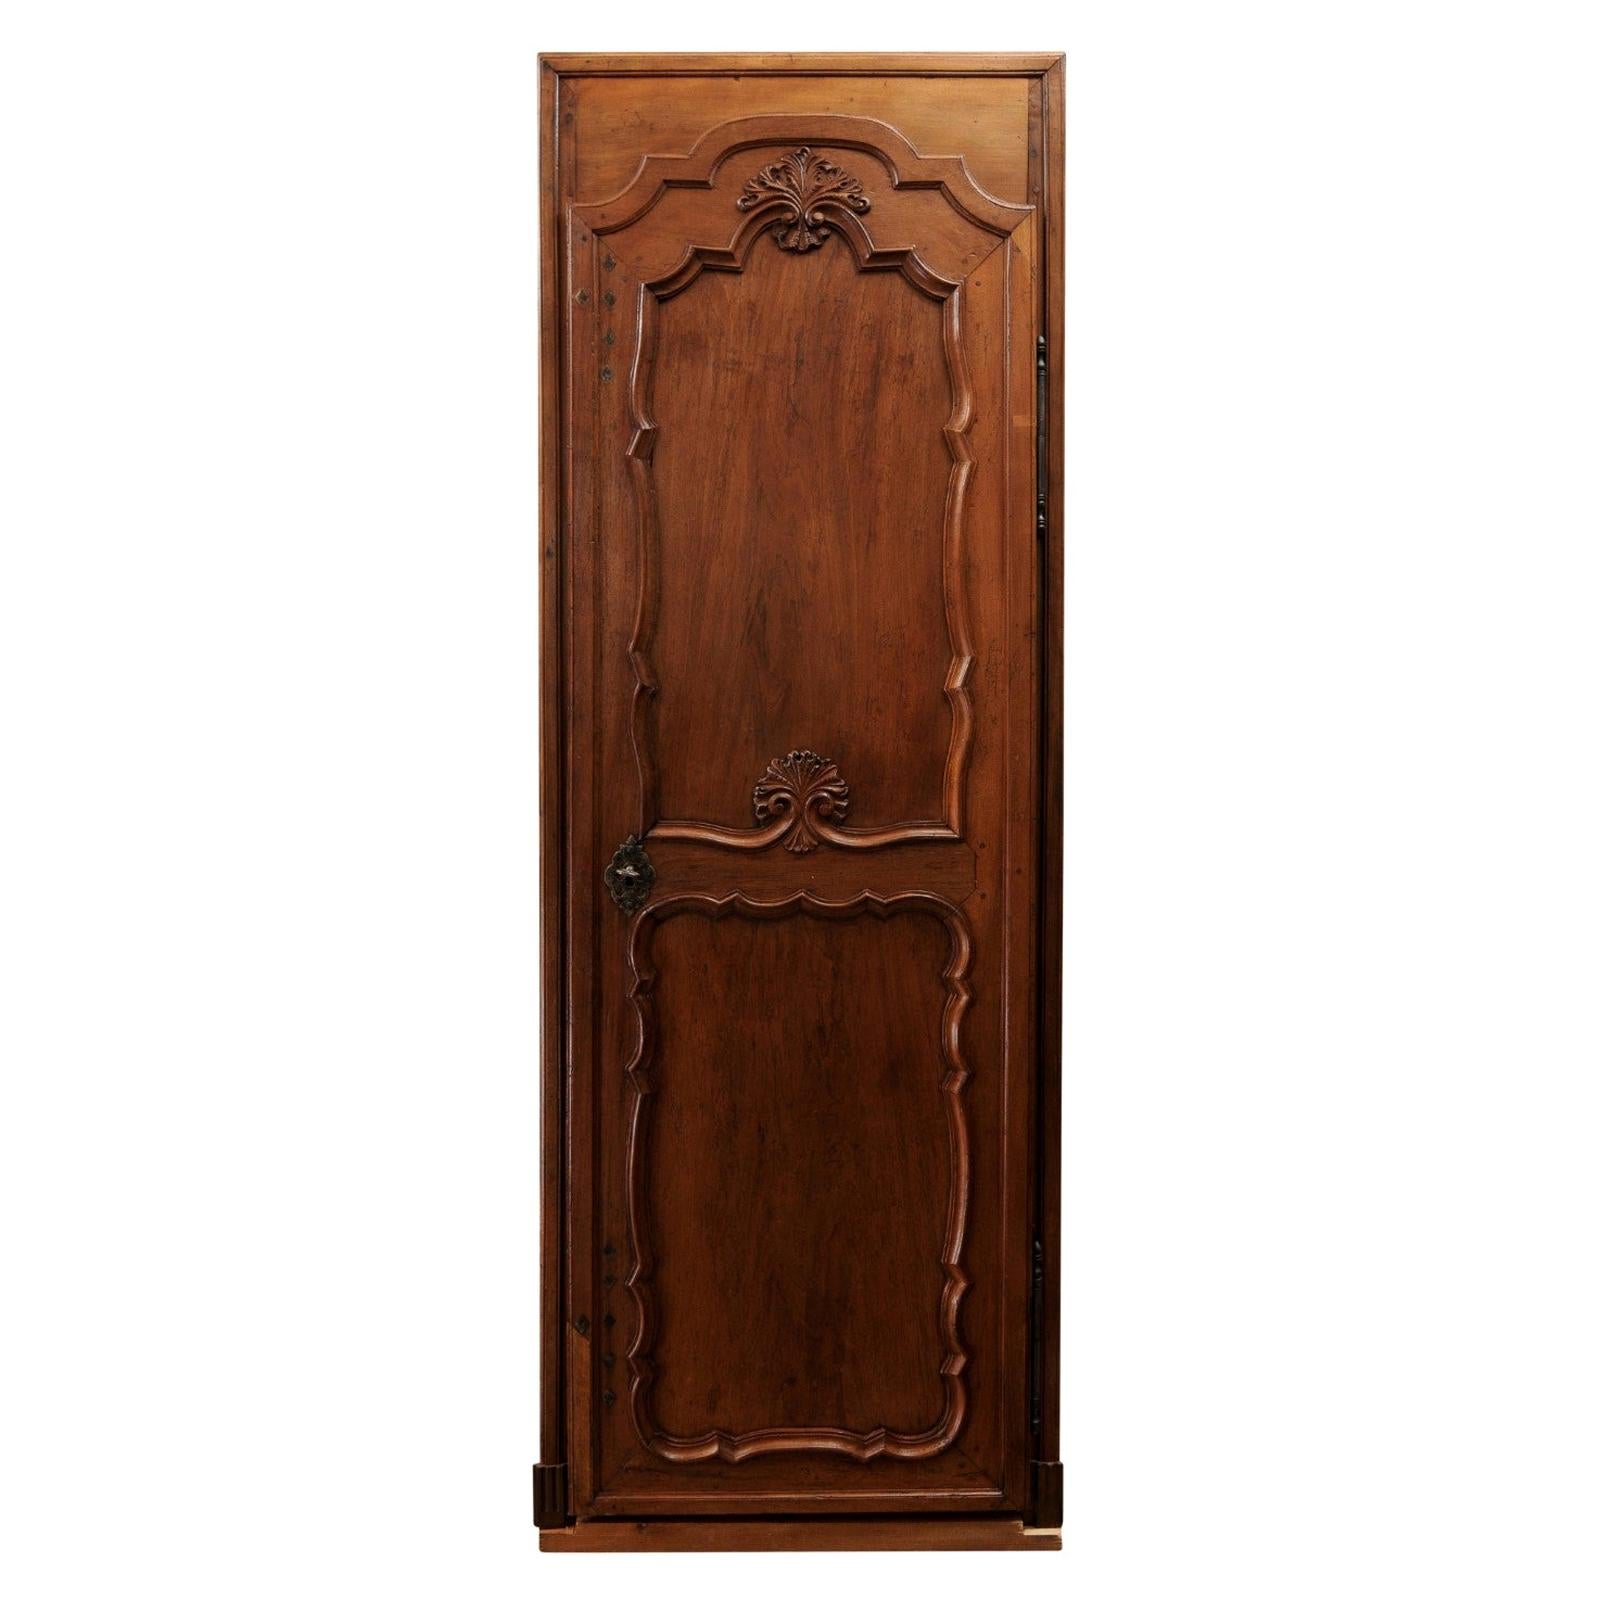 French 1790s Louis XVI Period Communication Door with Carved Foliage Motif